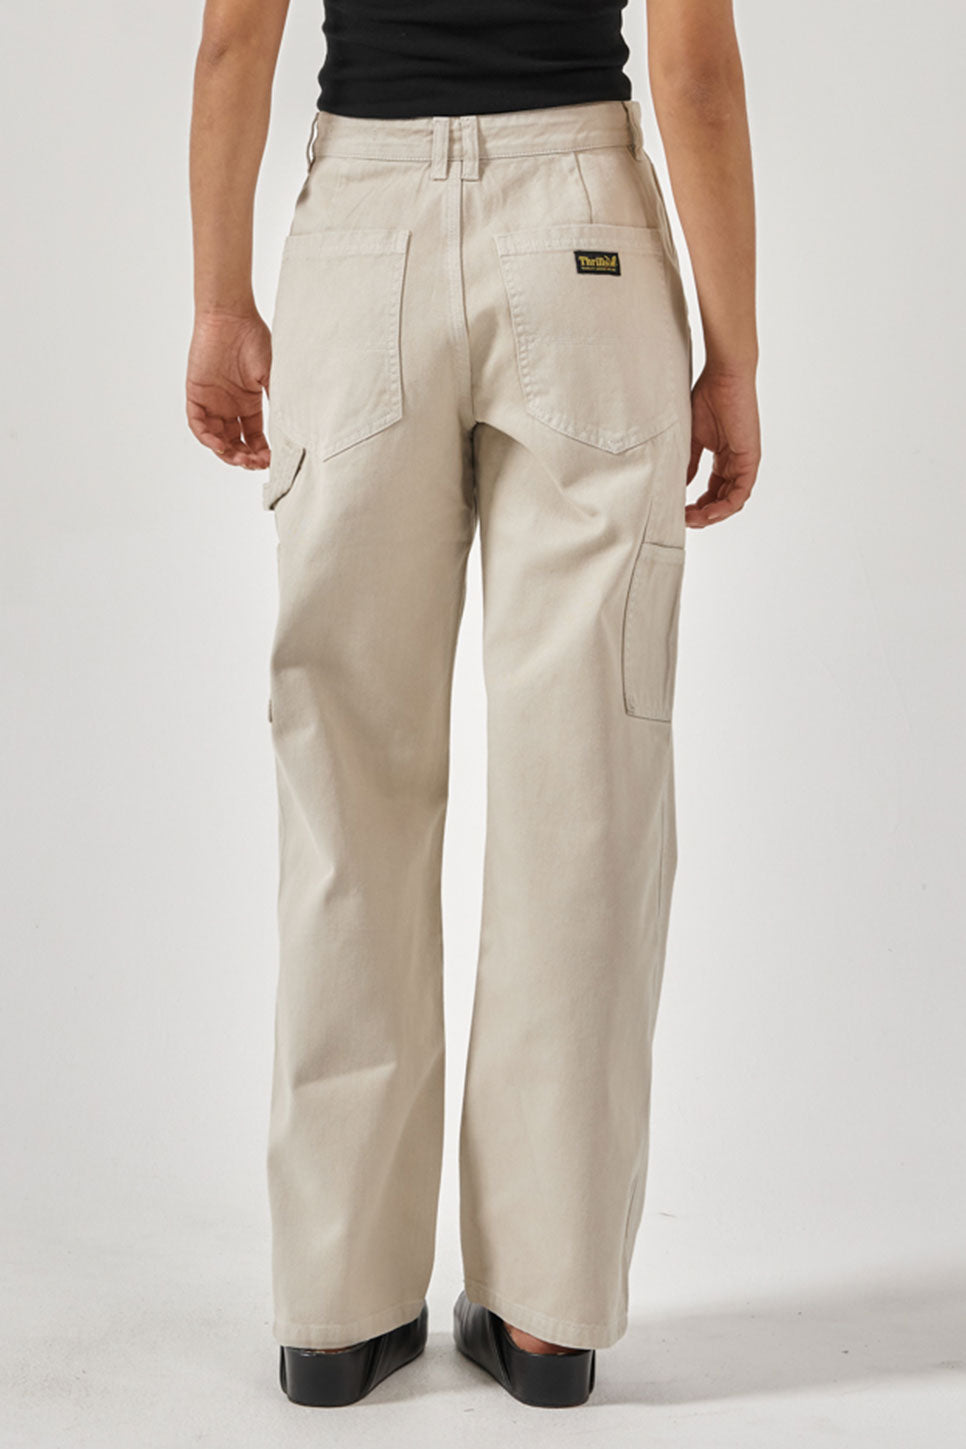 Thrills - Painter Pant - Oatmeal - Back